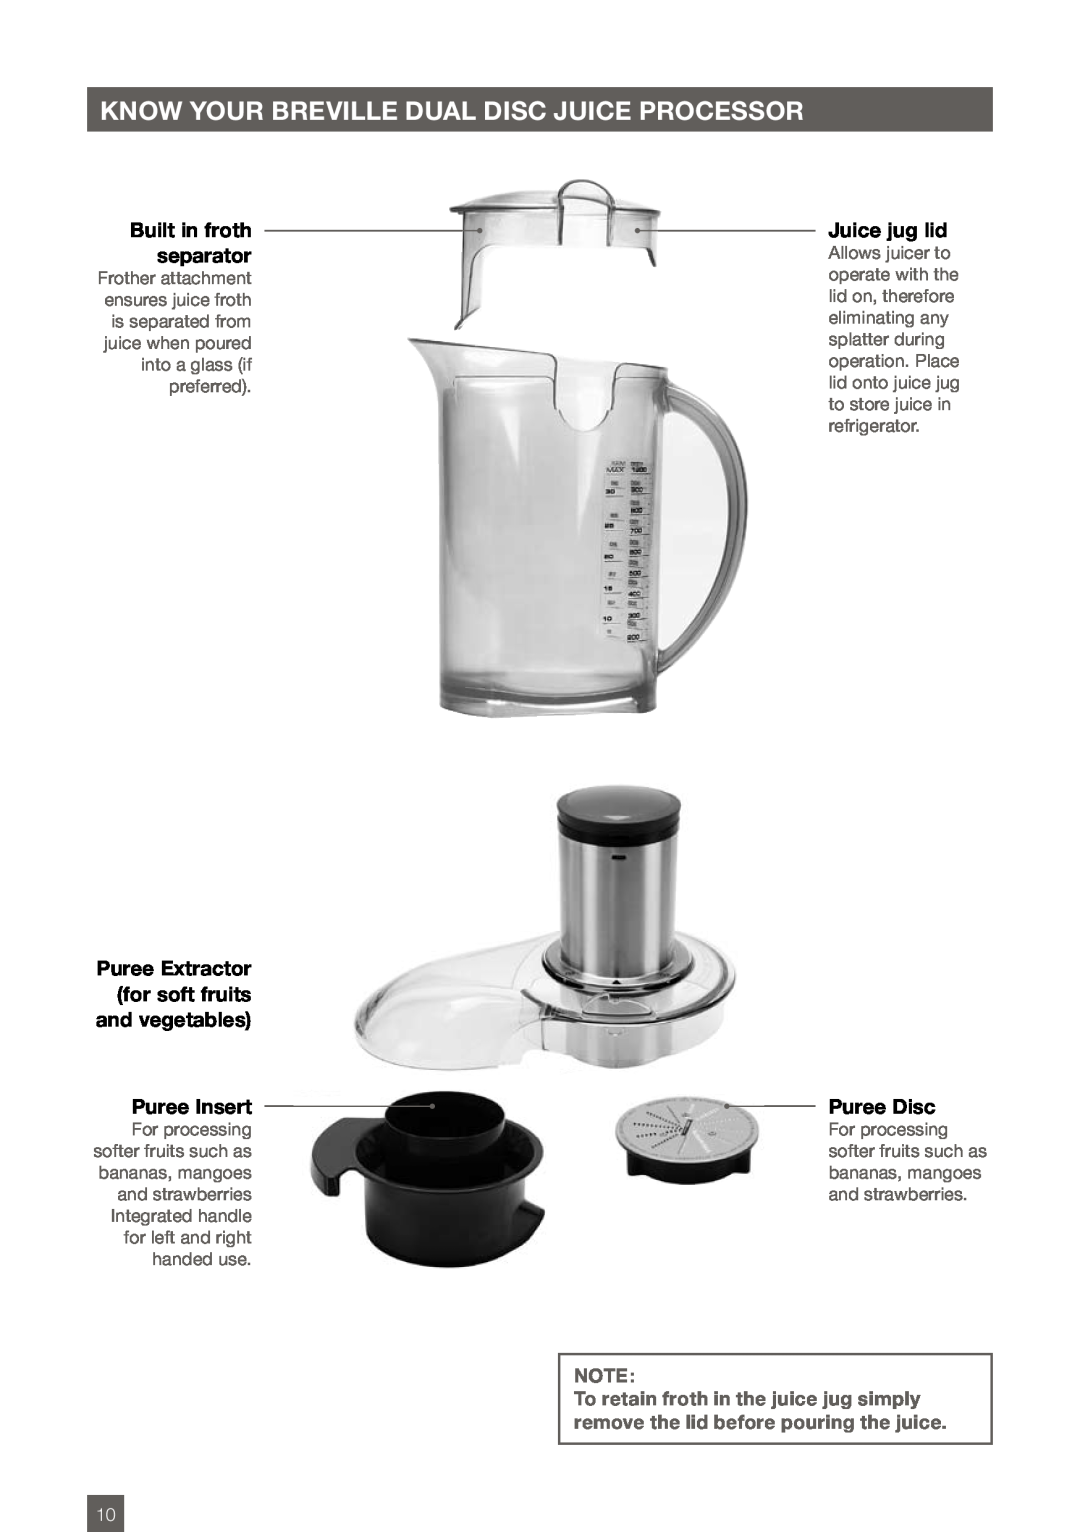 Breville BJE820XL KNOW YOUR BREVILLE Dual disc juice processor, Built in froth separator, Puree Insert, Juice jug lid 